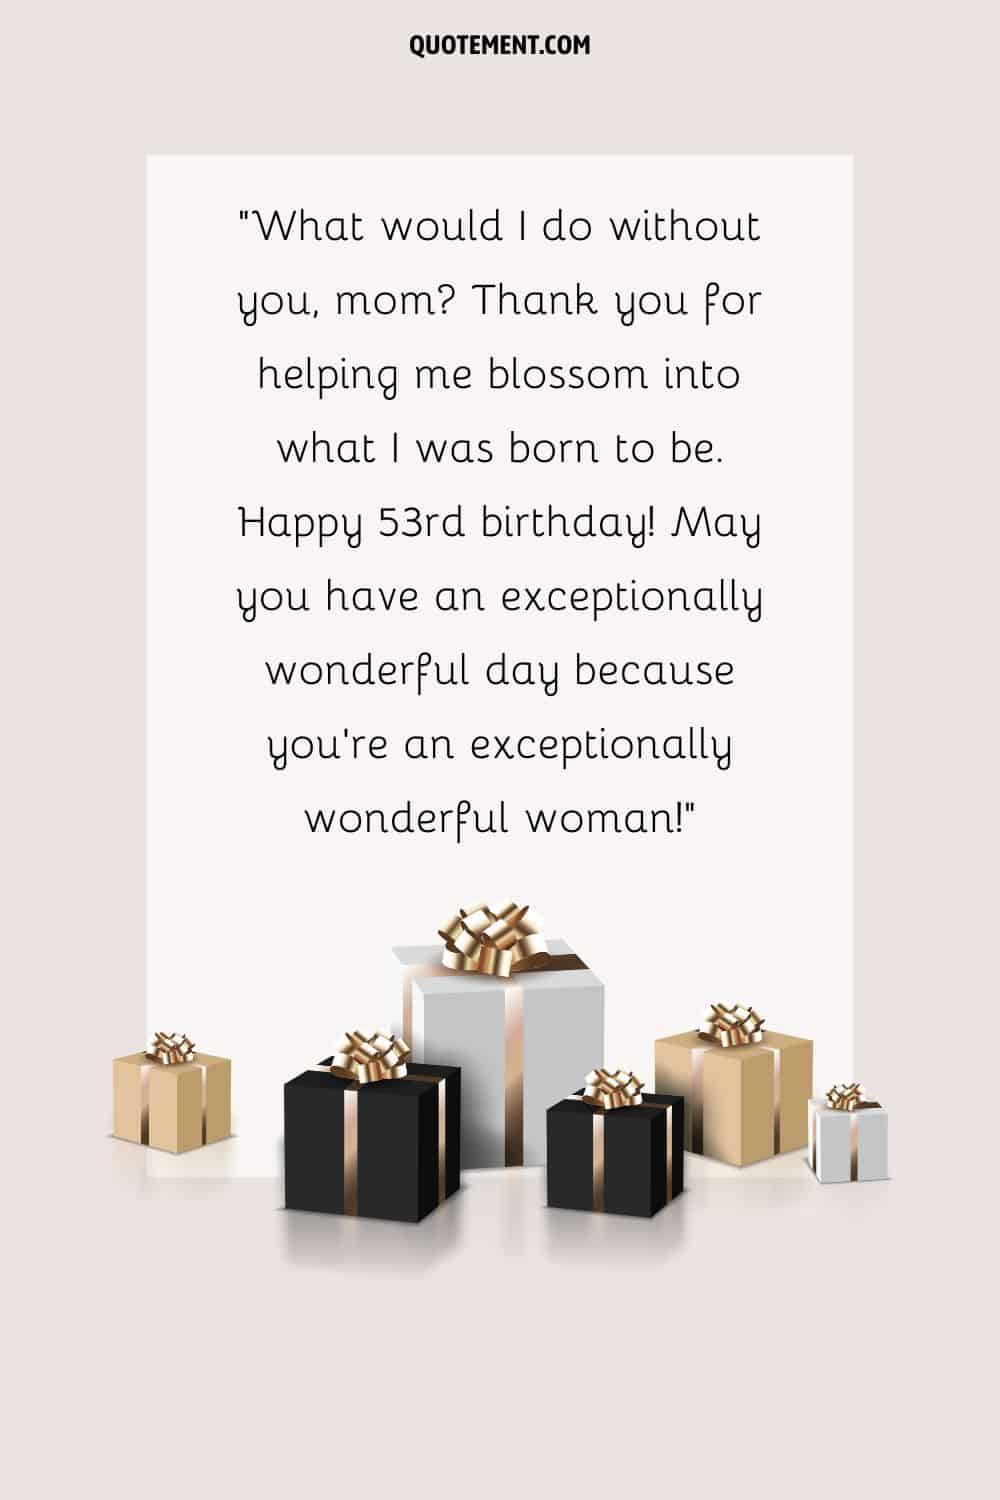 Touching message for a mom's 53rd birthday and gifts